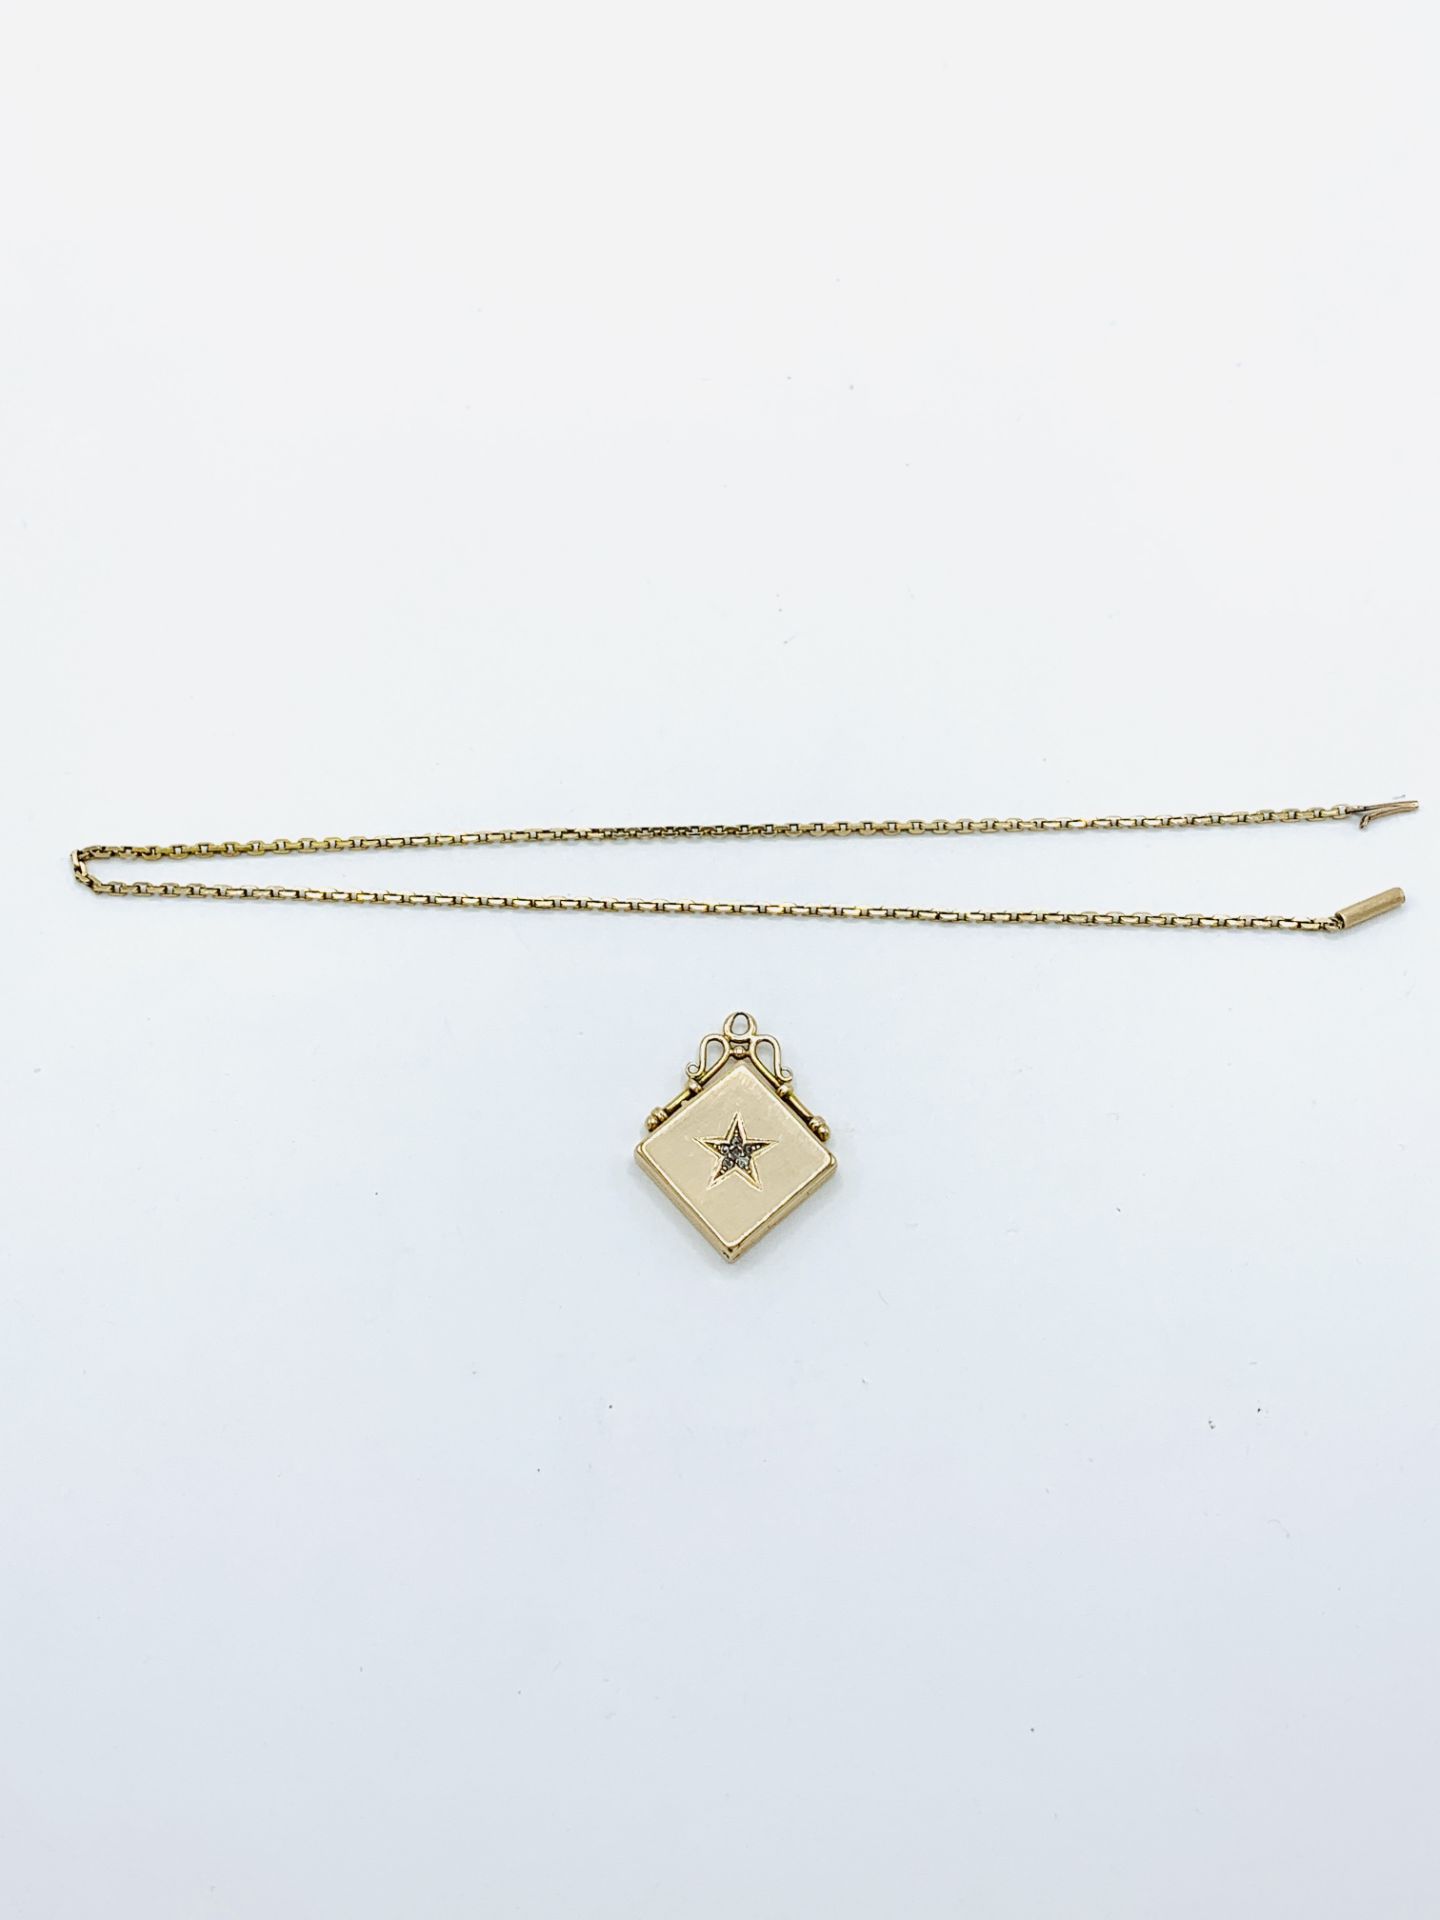 Late 19th century 14ct gold fob locket and chain